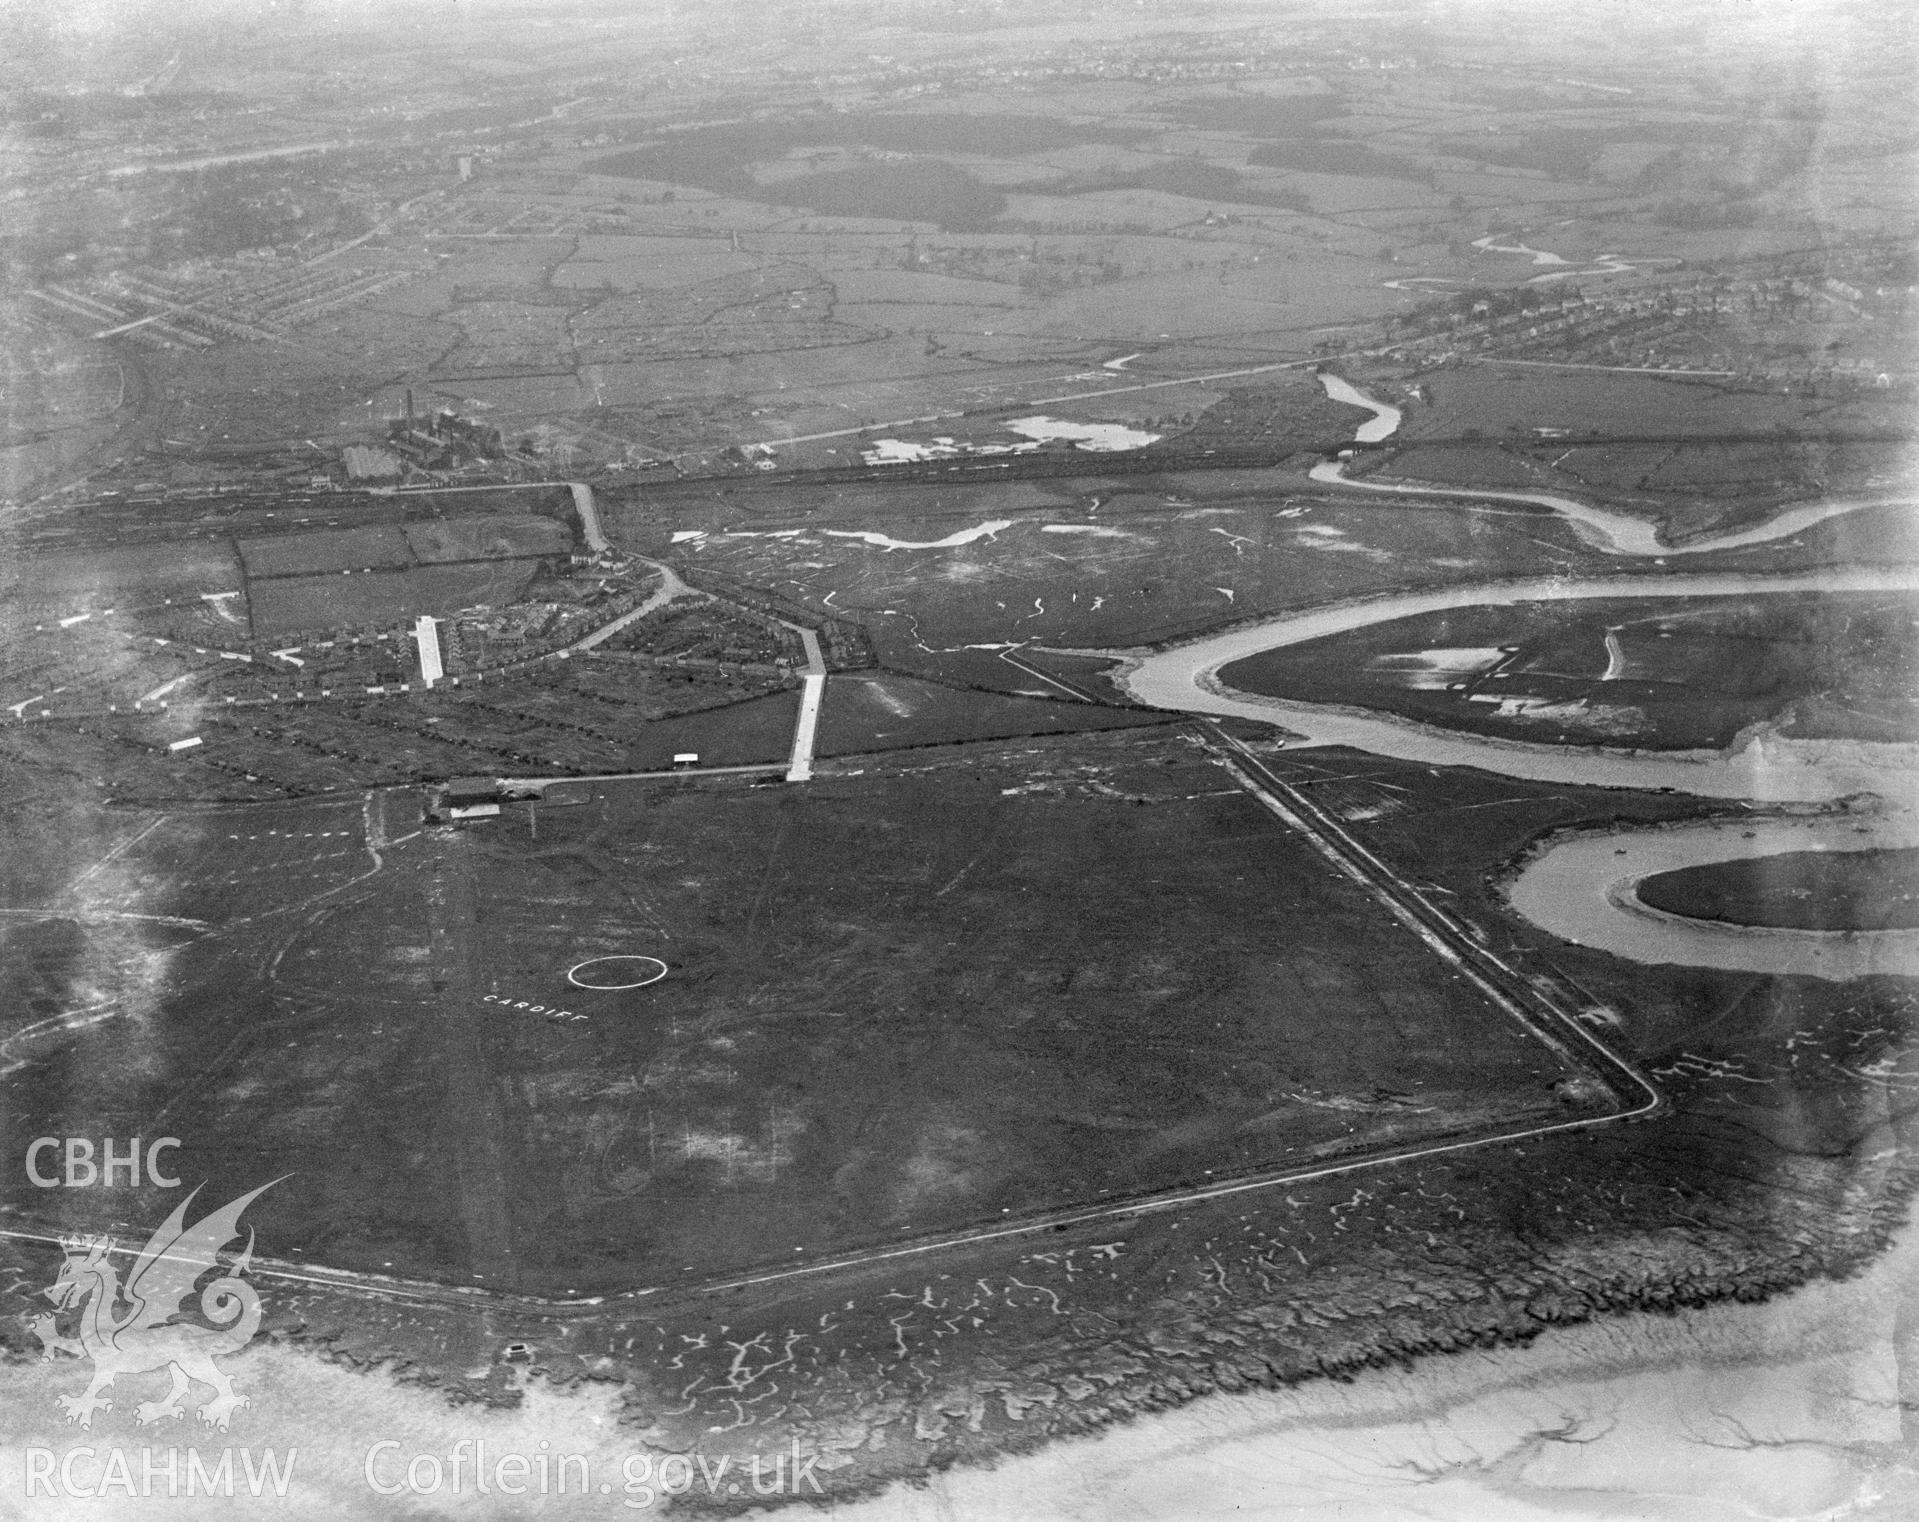 Digital copy of a black and white, oblique aerial photograph of Cardiff Aerodrome. The photograph shows a view of Cardiff Municipal Airport, as it was then known, from the South East.